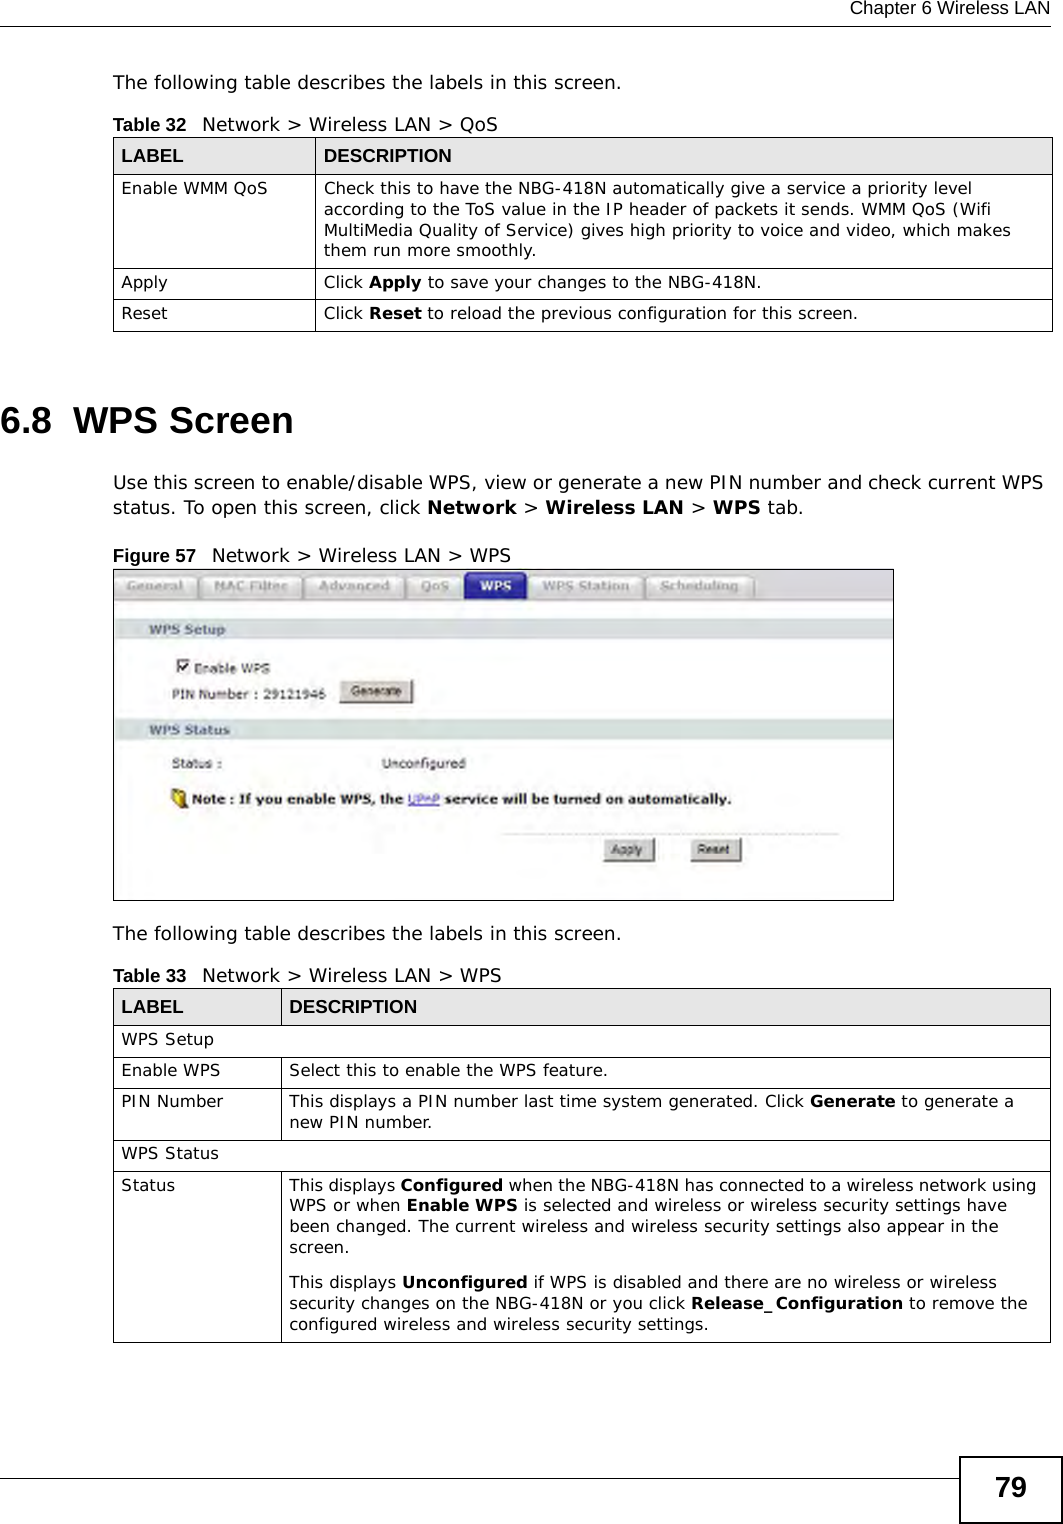  Chapter 6 Wireless LAN79The following table describes the labels in this screen. 6.8  WPS ScreenUse this screen to enable/disable WPS, view or generate a new PIN number and check current WPS status. To open this screen, click Network &gt; Wireless LAN &gt; WPS tab.Figure 57   Network &gt; Wireless LAN &gt; WPSThe following table describes the labels in this screen.Table 32   Network &gt; Wireless LAN &gt; QoSLABEL DESCRIPTIONEnable WMM QoS Check this to have the NBG-418N automatically give a service a priority level according to the ToS value in the IP header of packets it sends. WMM QoS (Wifi MultiMedia Quality of Service) gives high priority to voice and video, which makes them run more smoothly.Apply Click Apply to save your changes to the NBG-418N.Reset Click Reset to reload the previous configuration for this screen.Table 33   Network &gt; Wireless LAN &gt; WPSLABEL DESCRIPTIONWPS SetupEnable WPS Select this to enable the WPS feature.PIN Number This displays a PIN number last time system generated. Click Generate to generate a new PIN number.WPS StatusStatus This displays Configured when the NBG-418N has connected to a wireless network using WPS or when Enable WPS is selected and wireless or wireless security settings have been changed. The current wireless and wireless security settings also appear in the screen.This displays Unconfigured if WPS is disabled and there are no wireless or wireless security changes on the NBG-418N or you click Release_Configuration to remove the configured wireless and wireless security settings.